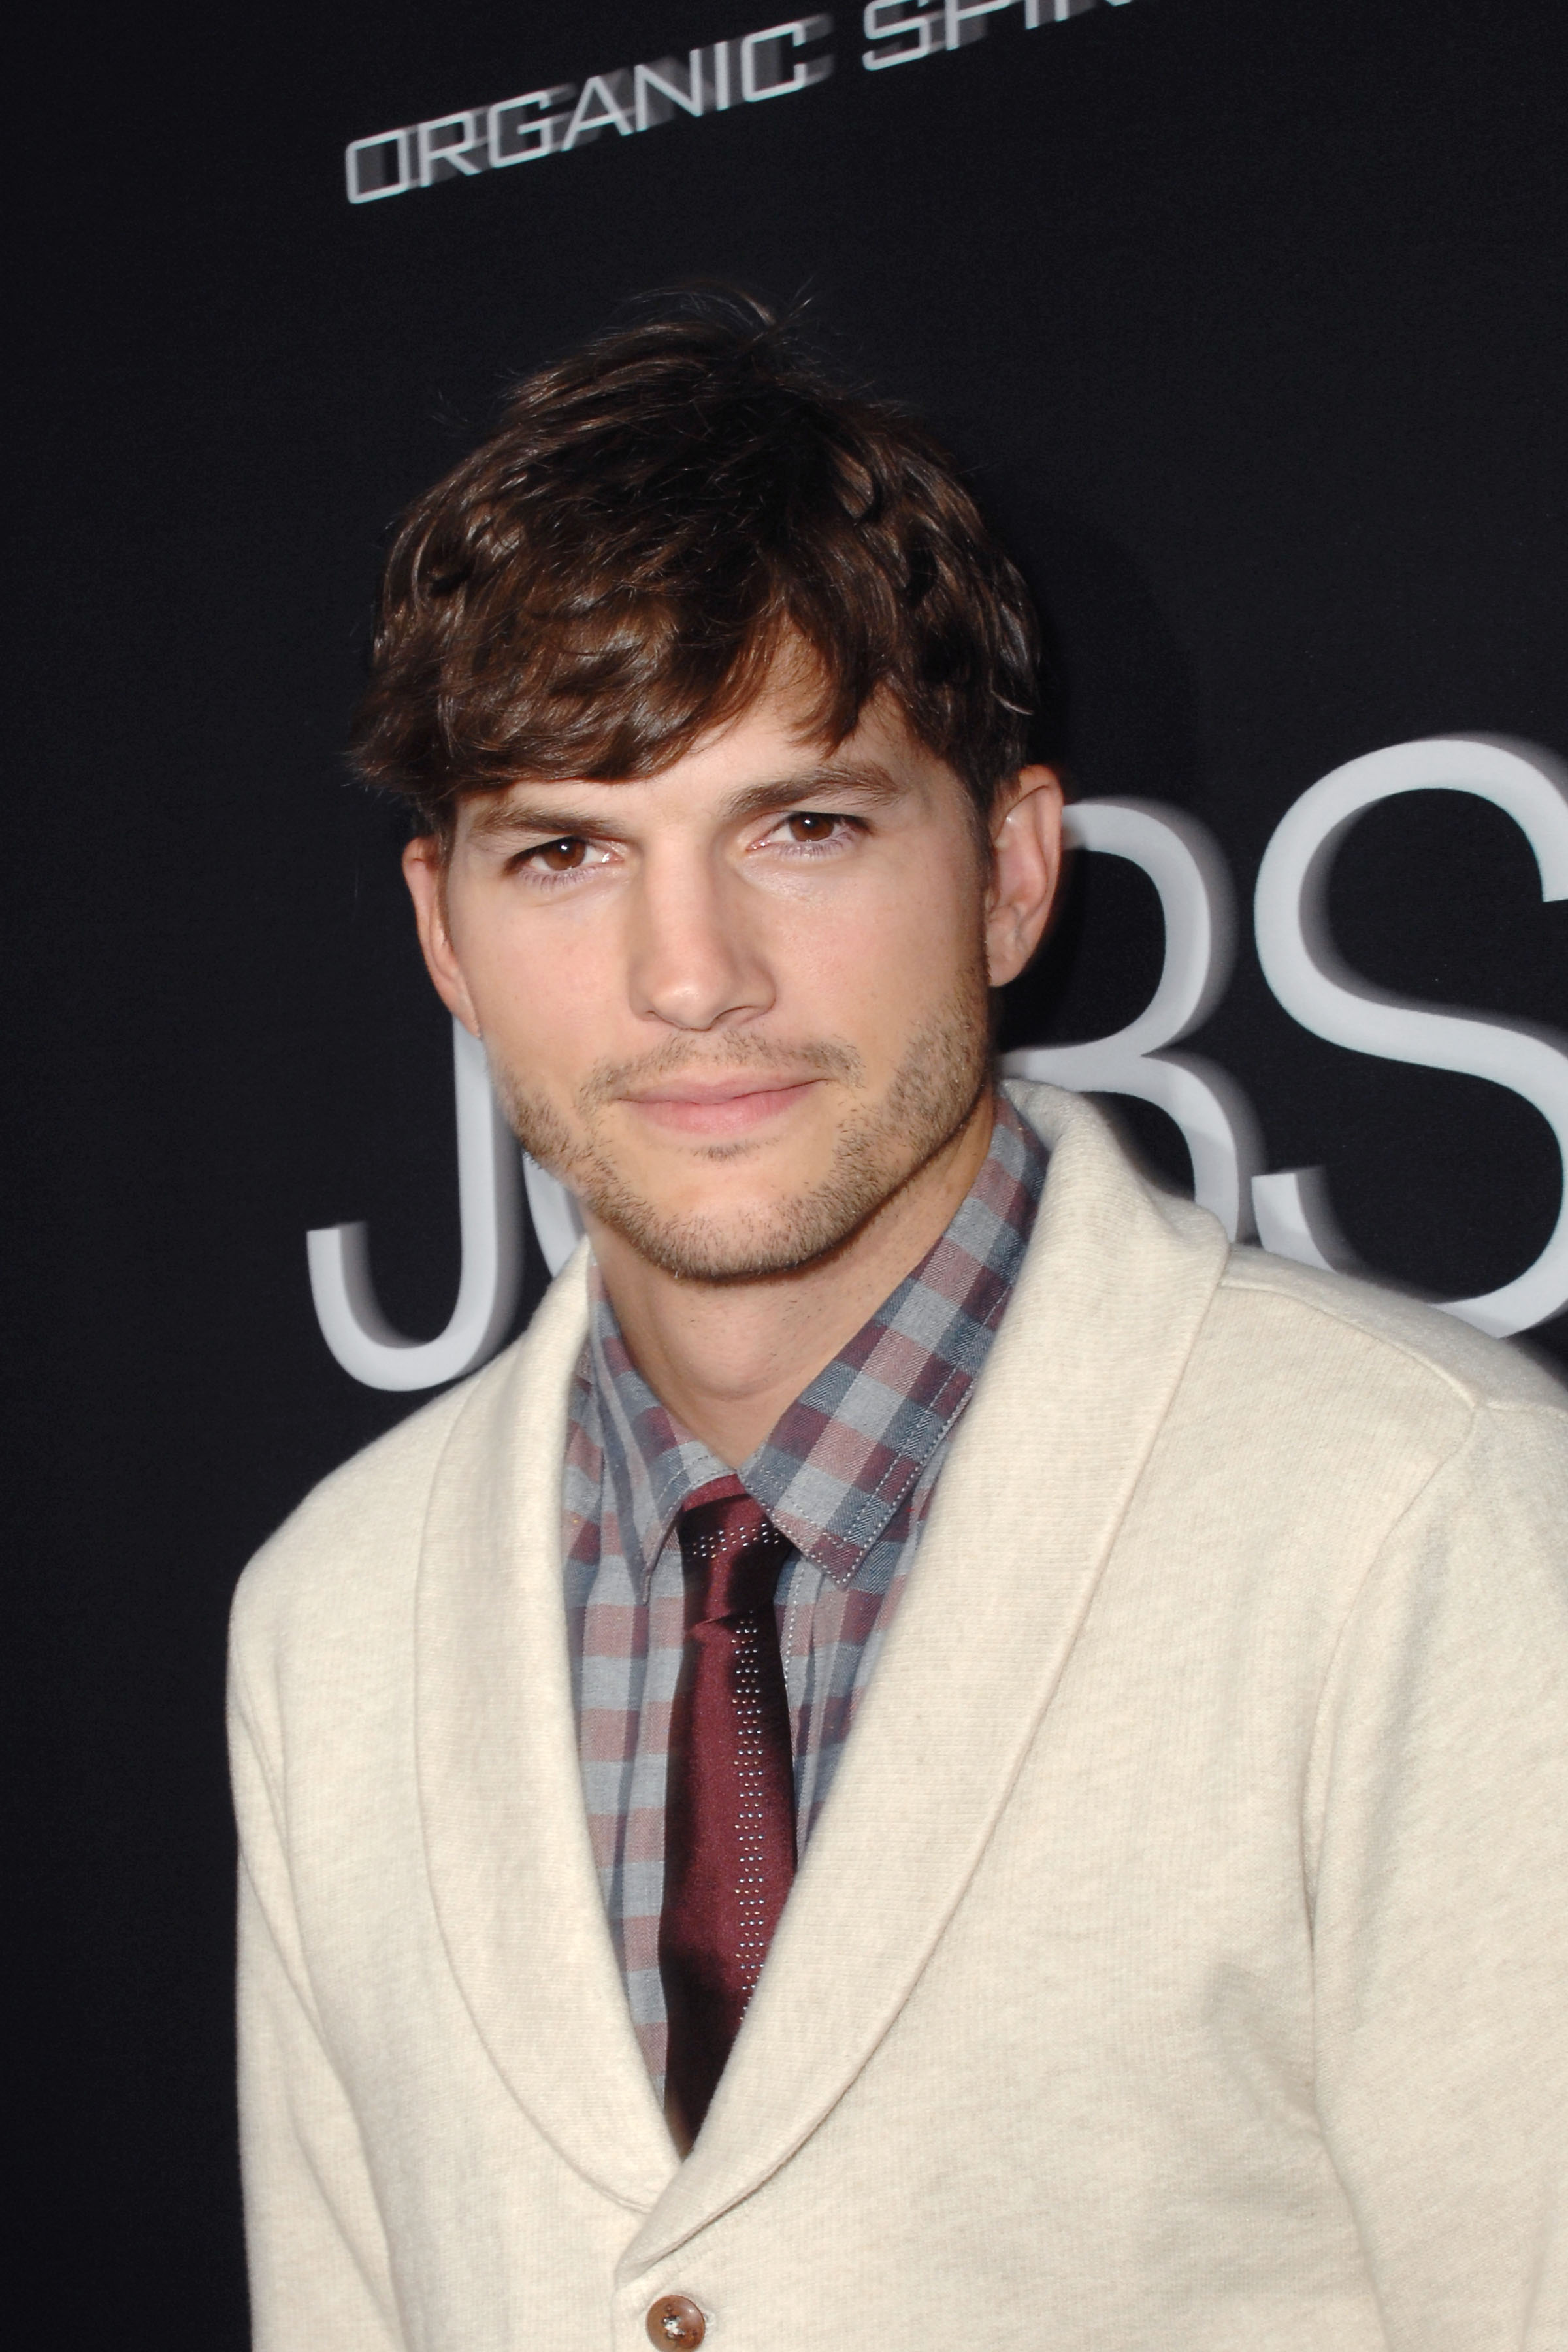 Ashton Kutcher - American Harvest Organic Spirit presents a special Los Angeles Screening of Open Road and Five Star Feature Films' JOBS - photo by Patrick McMullan